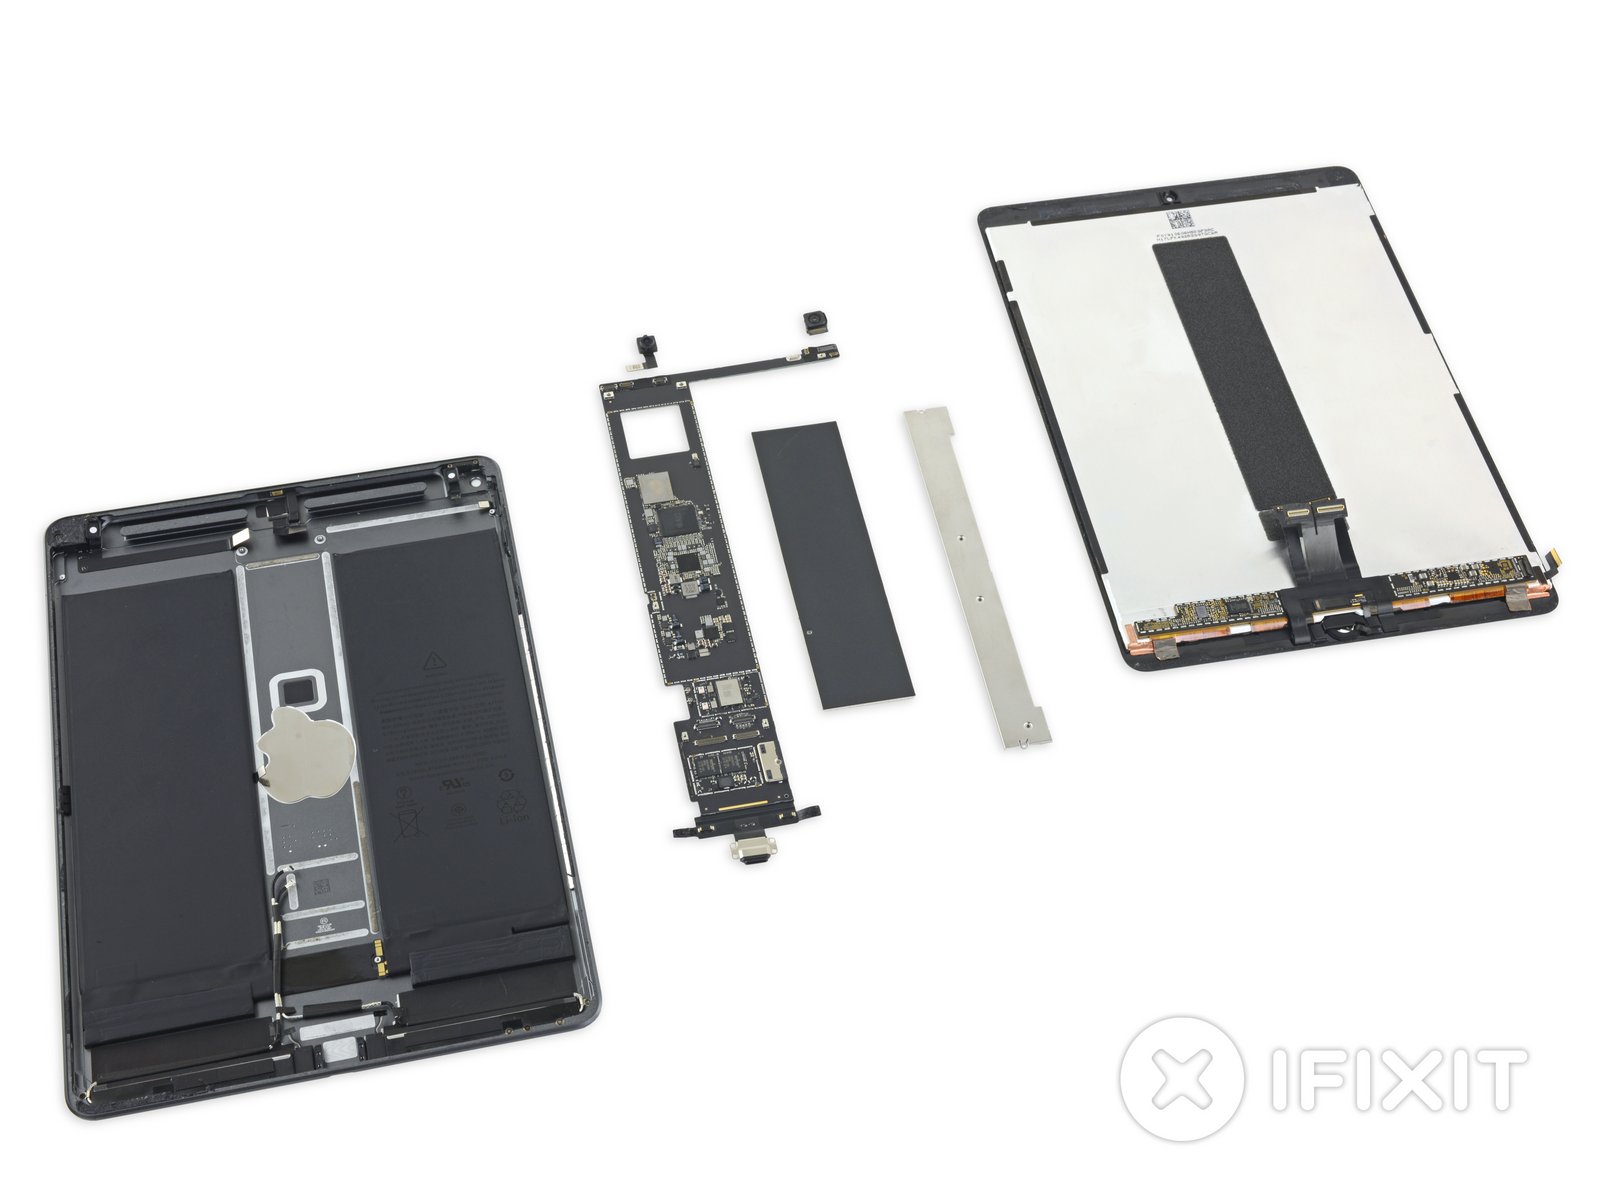 iFixit: New iPad Air Is Almost Equal to Late 10.5-inch iPad Pro